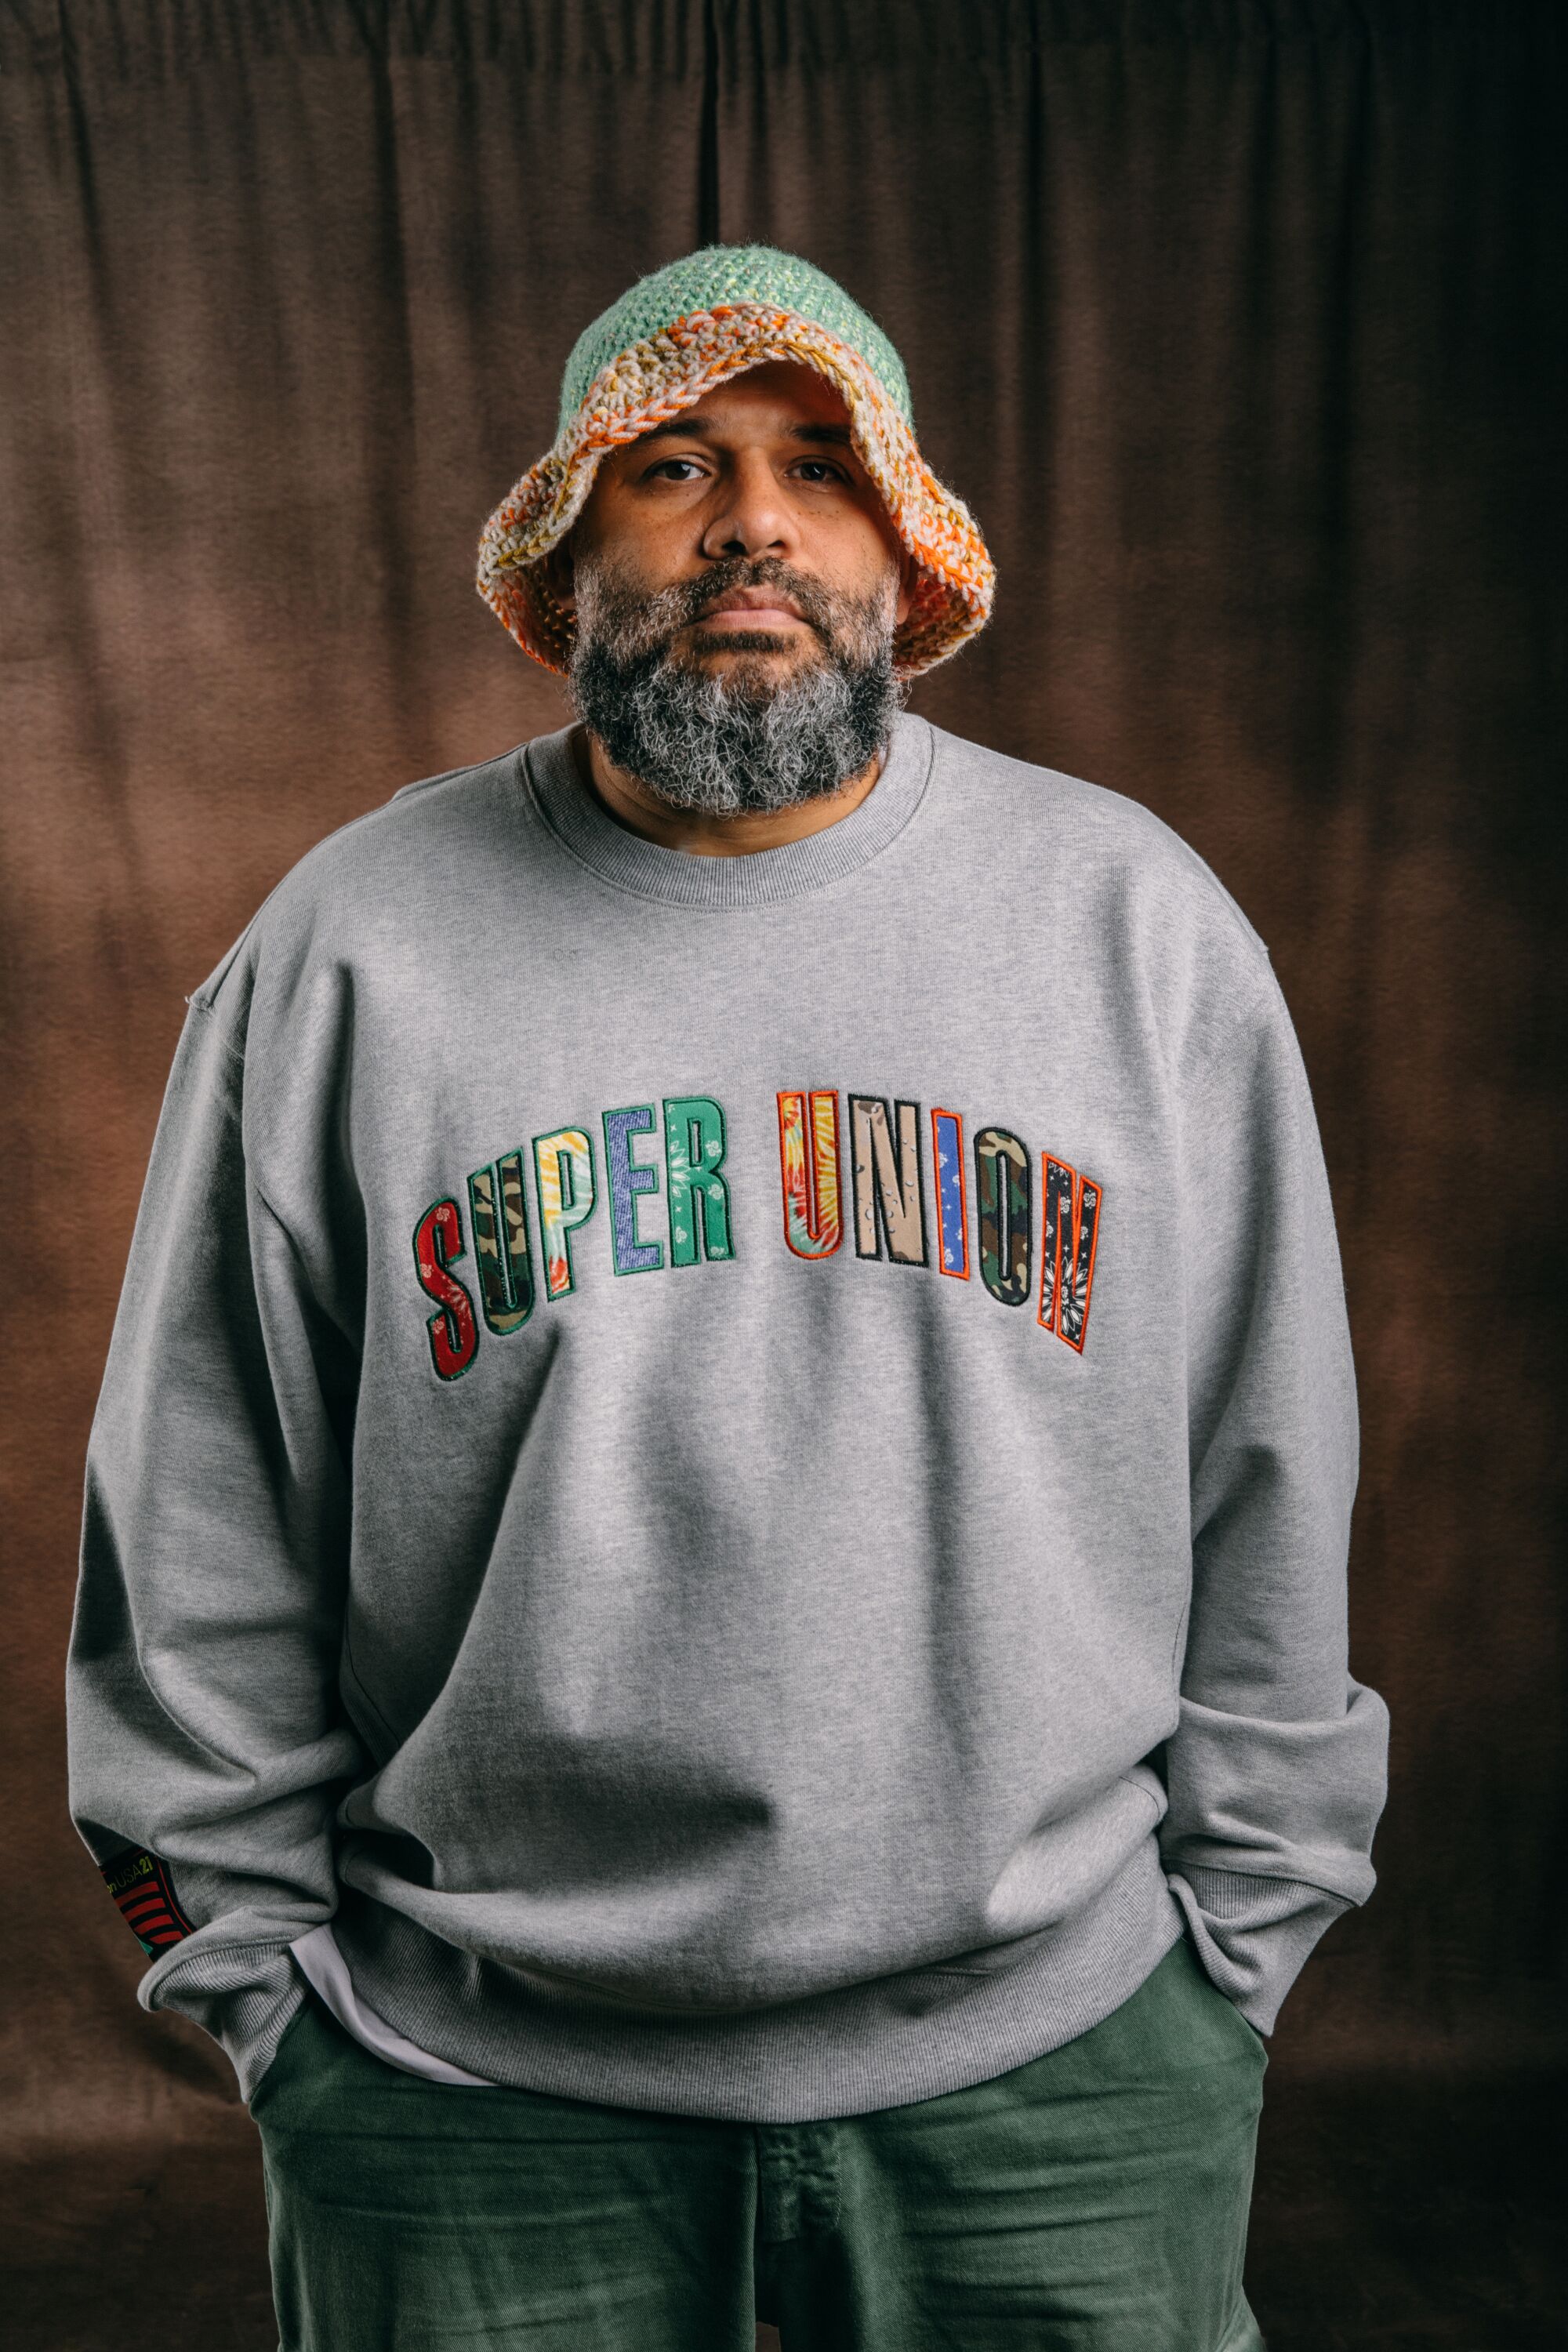 a bearded model wearing a Union X Supervsn grey sweater with the words "Super Union" across the front